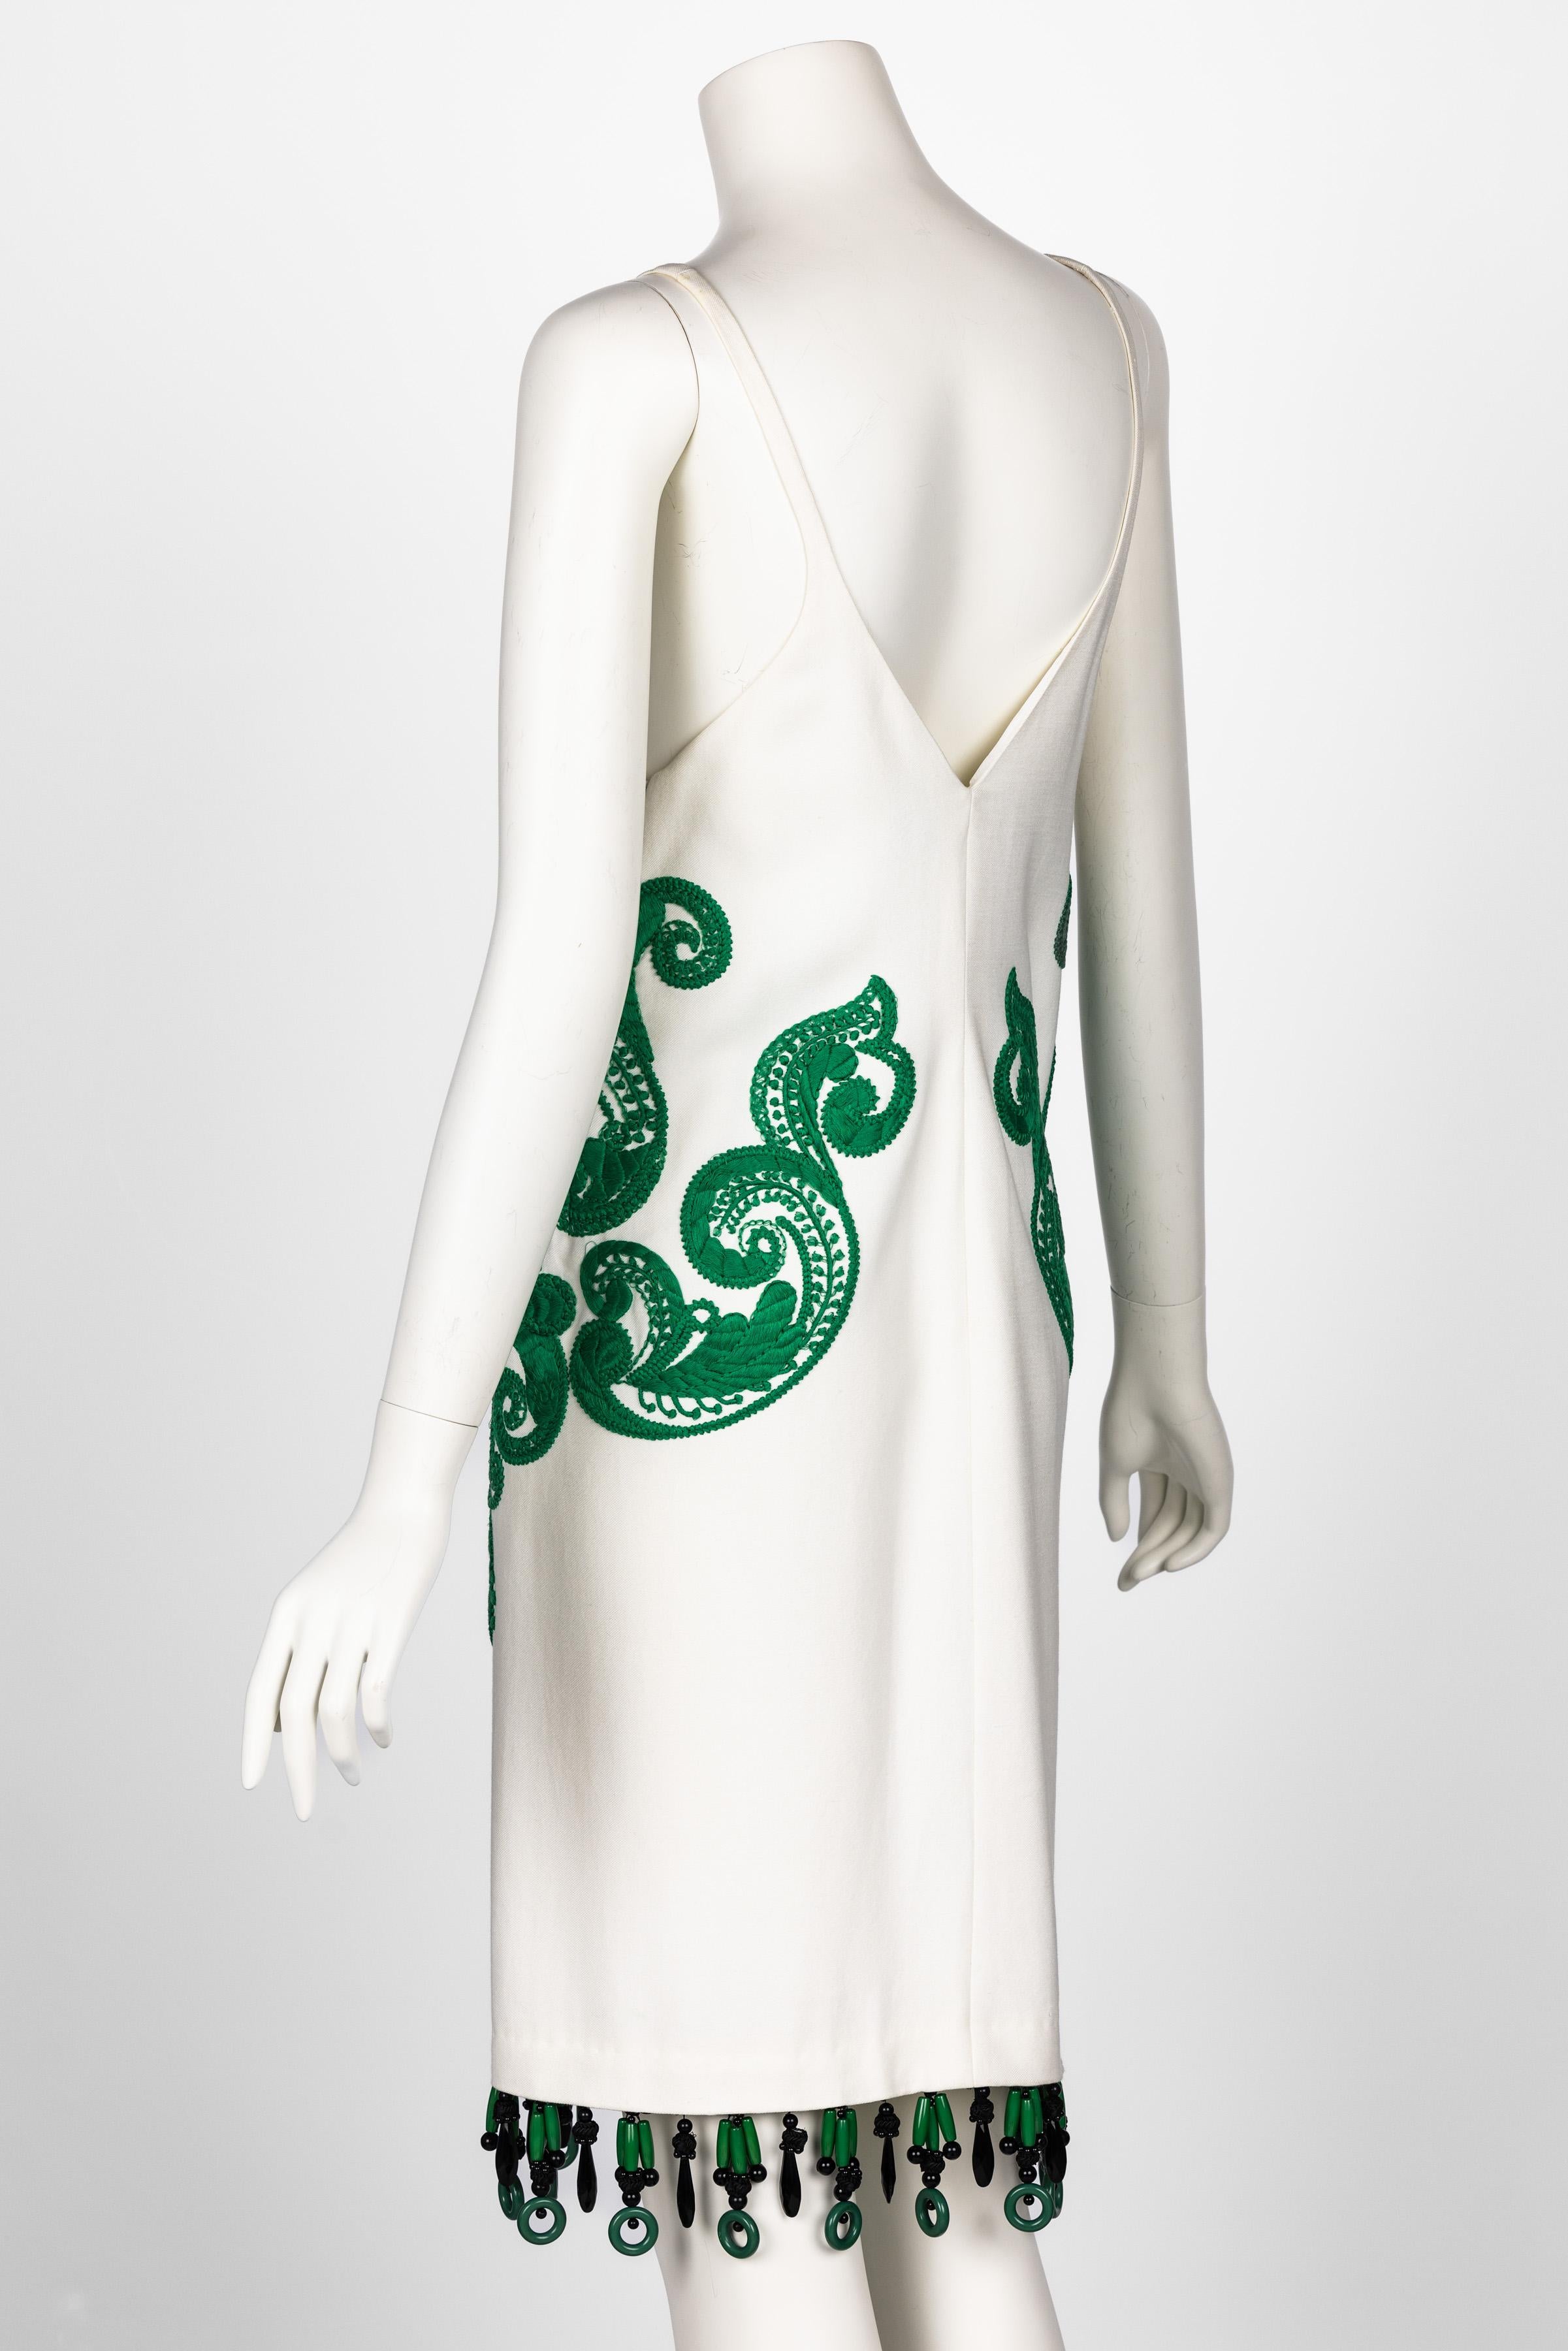 Prada S/S 2011 Runway Look #28 Embroidered Beaded Modern Flapper Dress In Excellent Condition In Boca Raton, FL